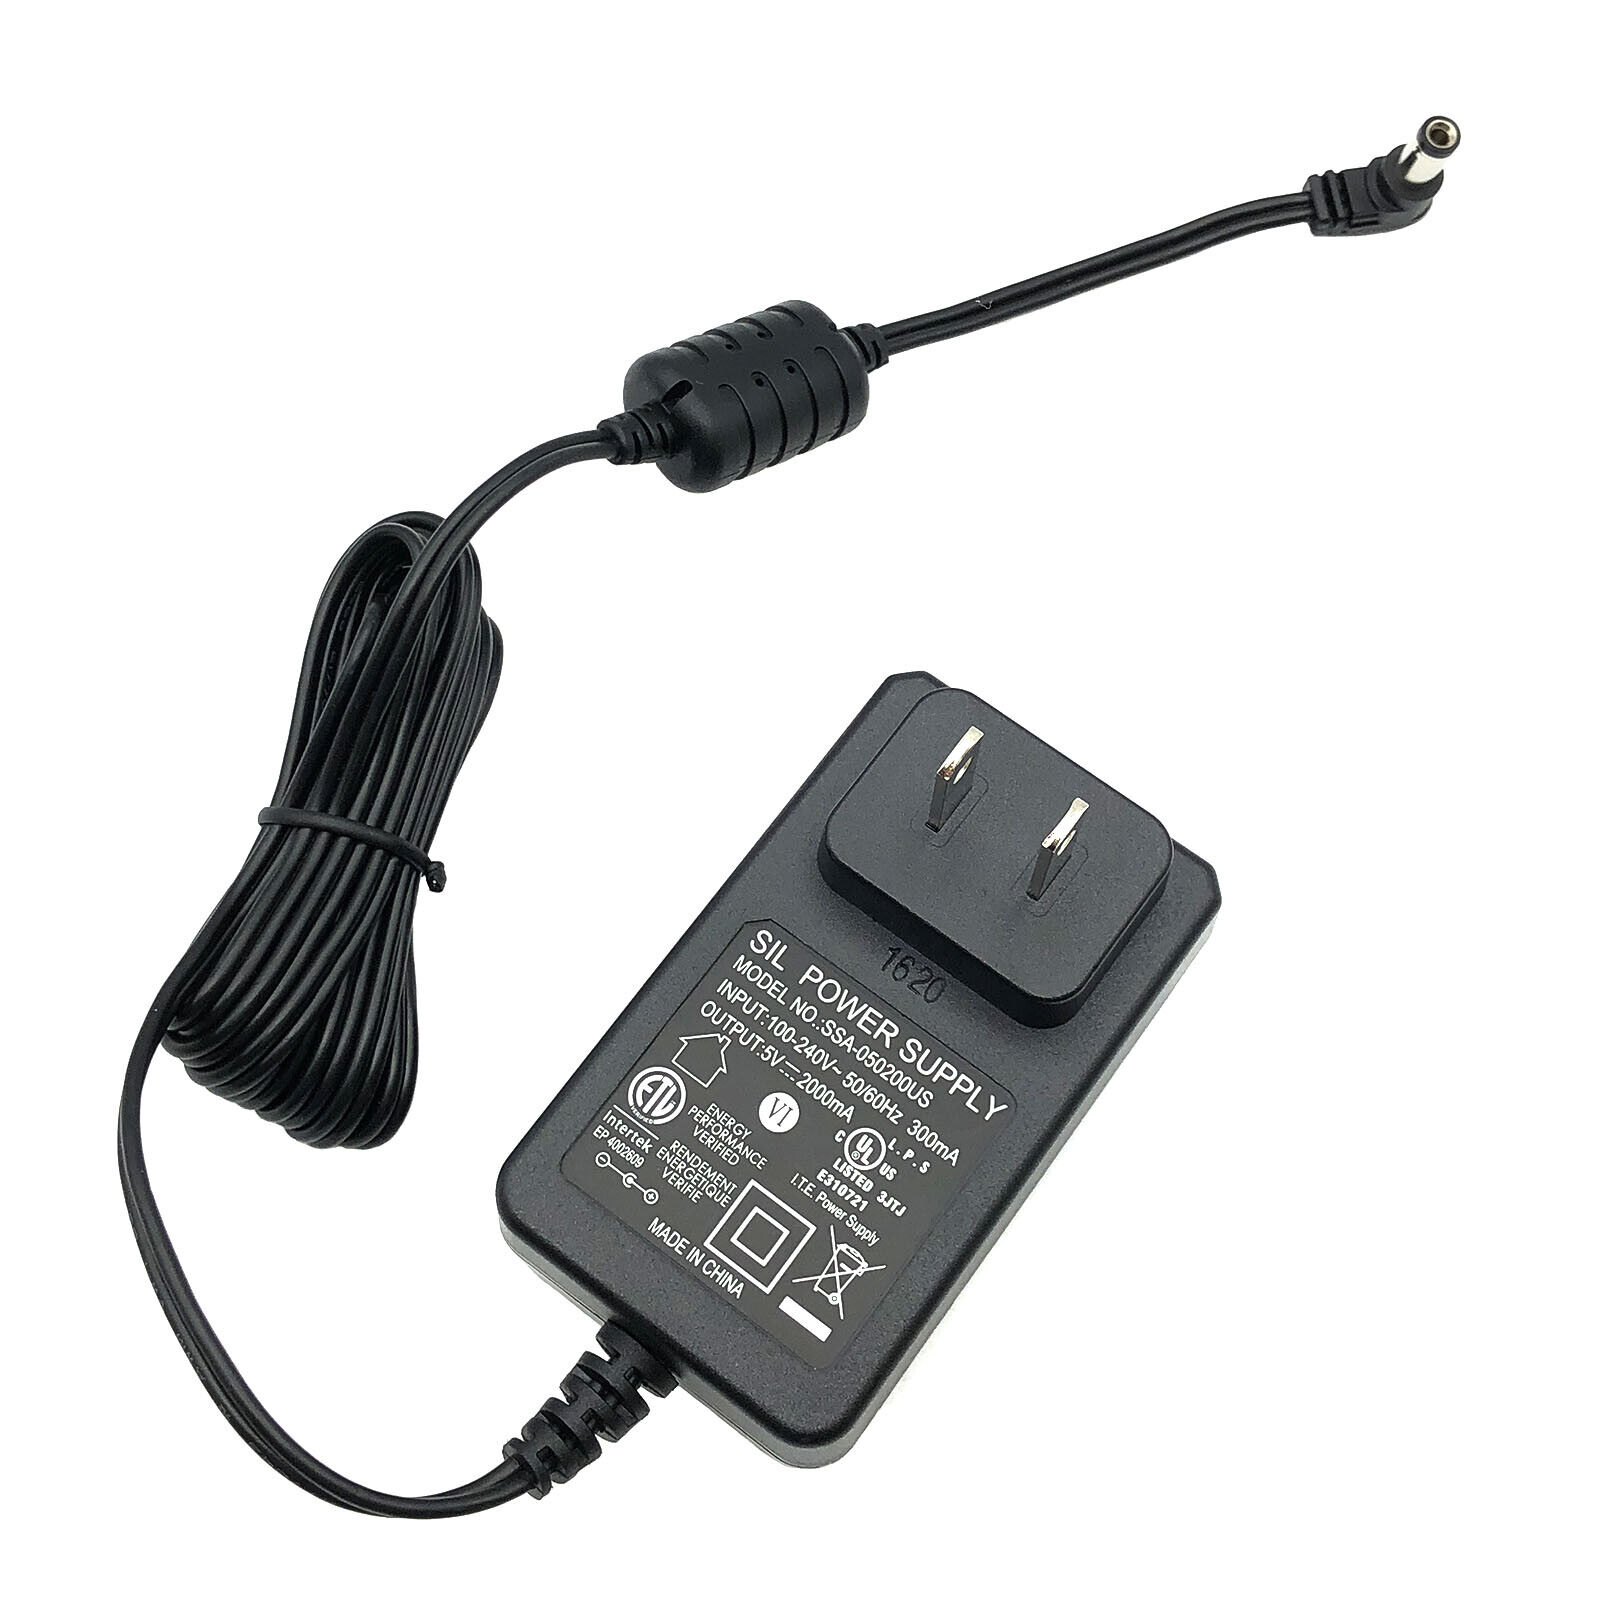 NEW Genuine SIL AC Adapter Power Supply Charger for Cisco ATA-182 ATA-186 w/PC